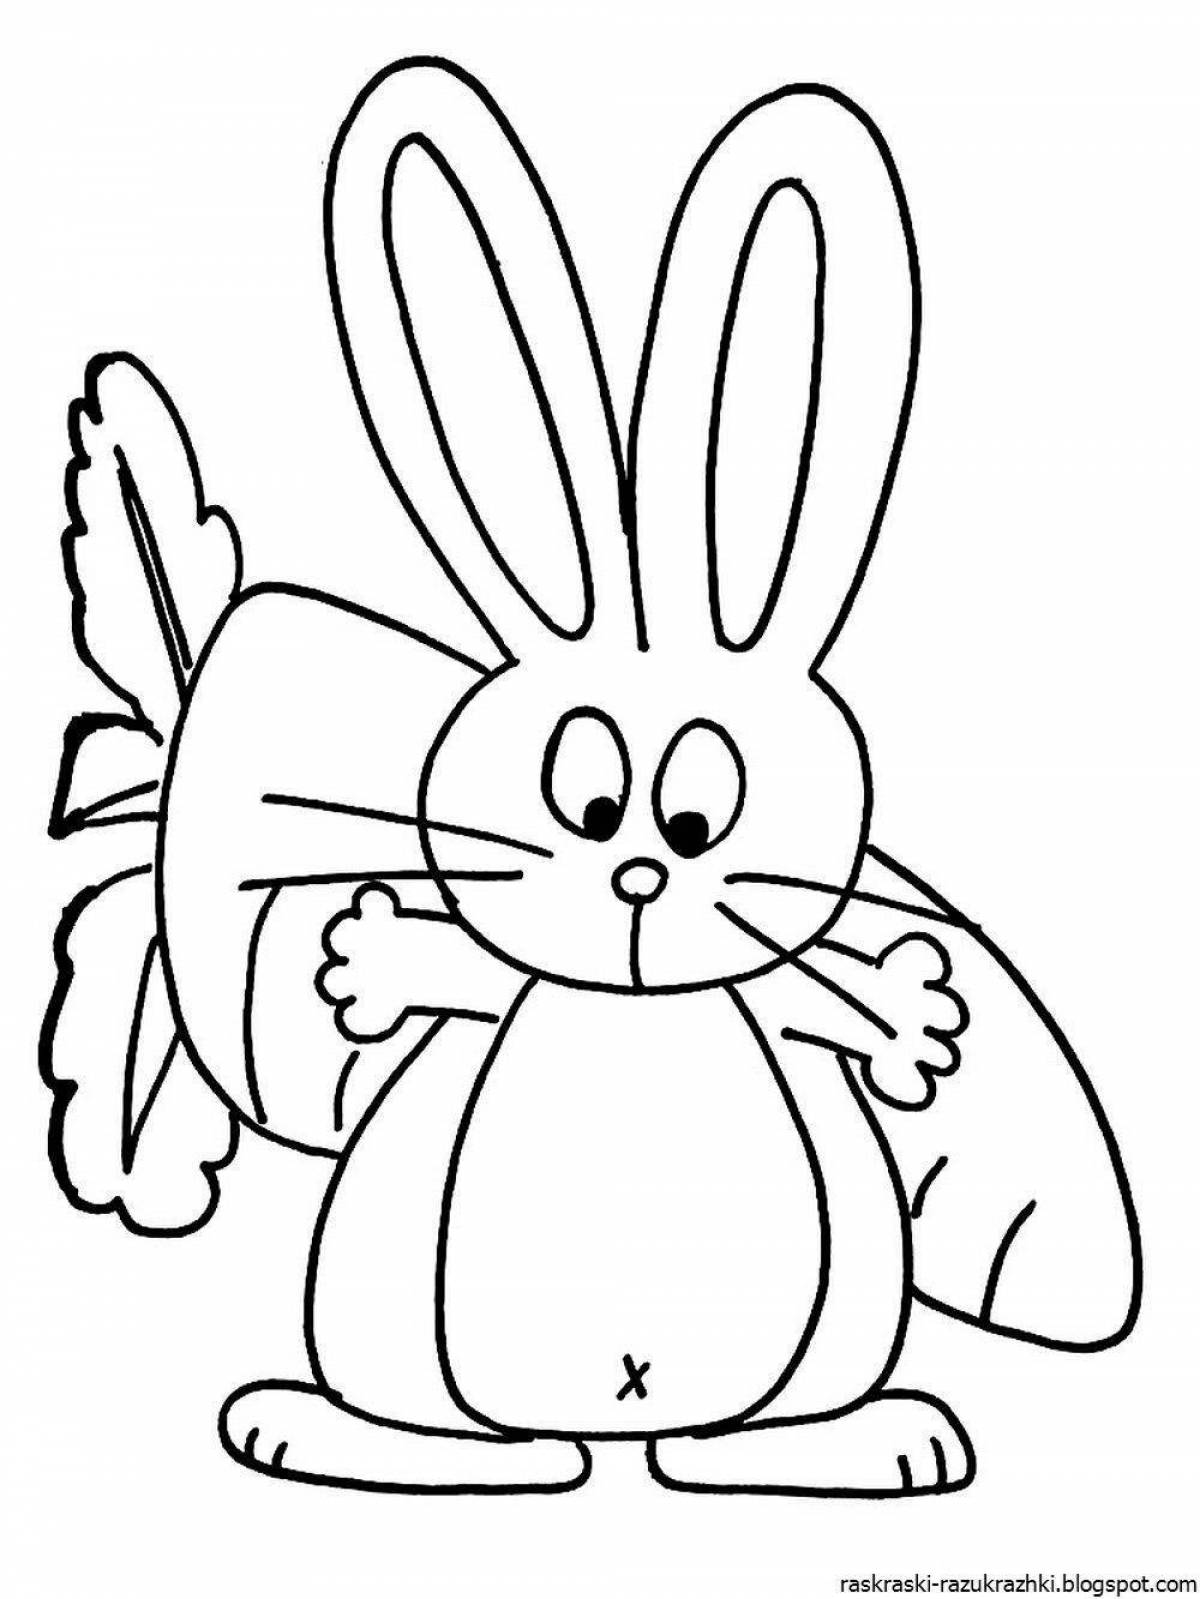 Fluffy bunny coloring book with carrots